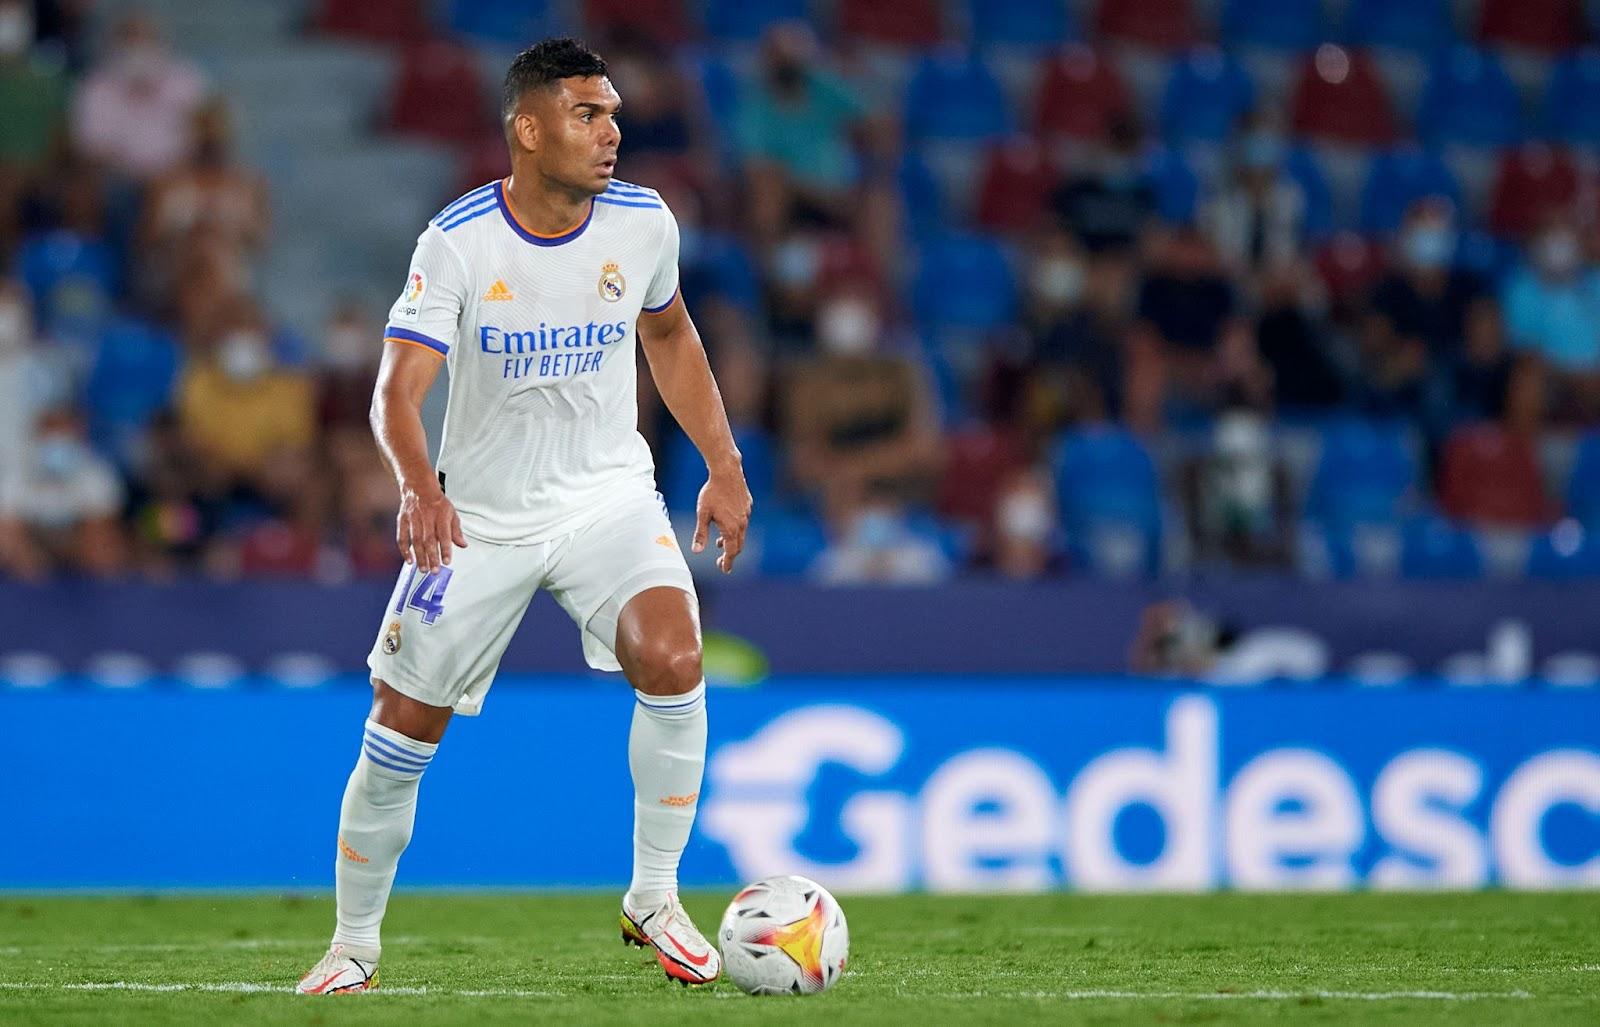 Casemiro was the underrated hero for Real Madrid this season